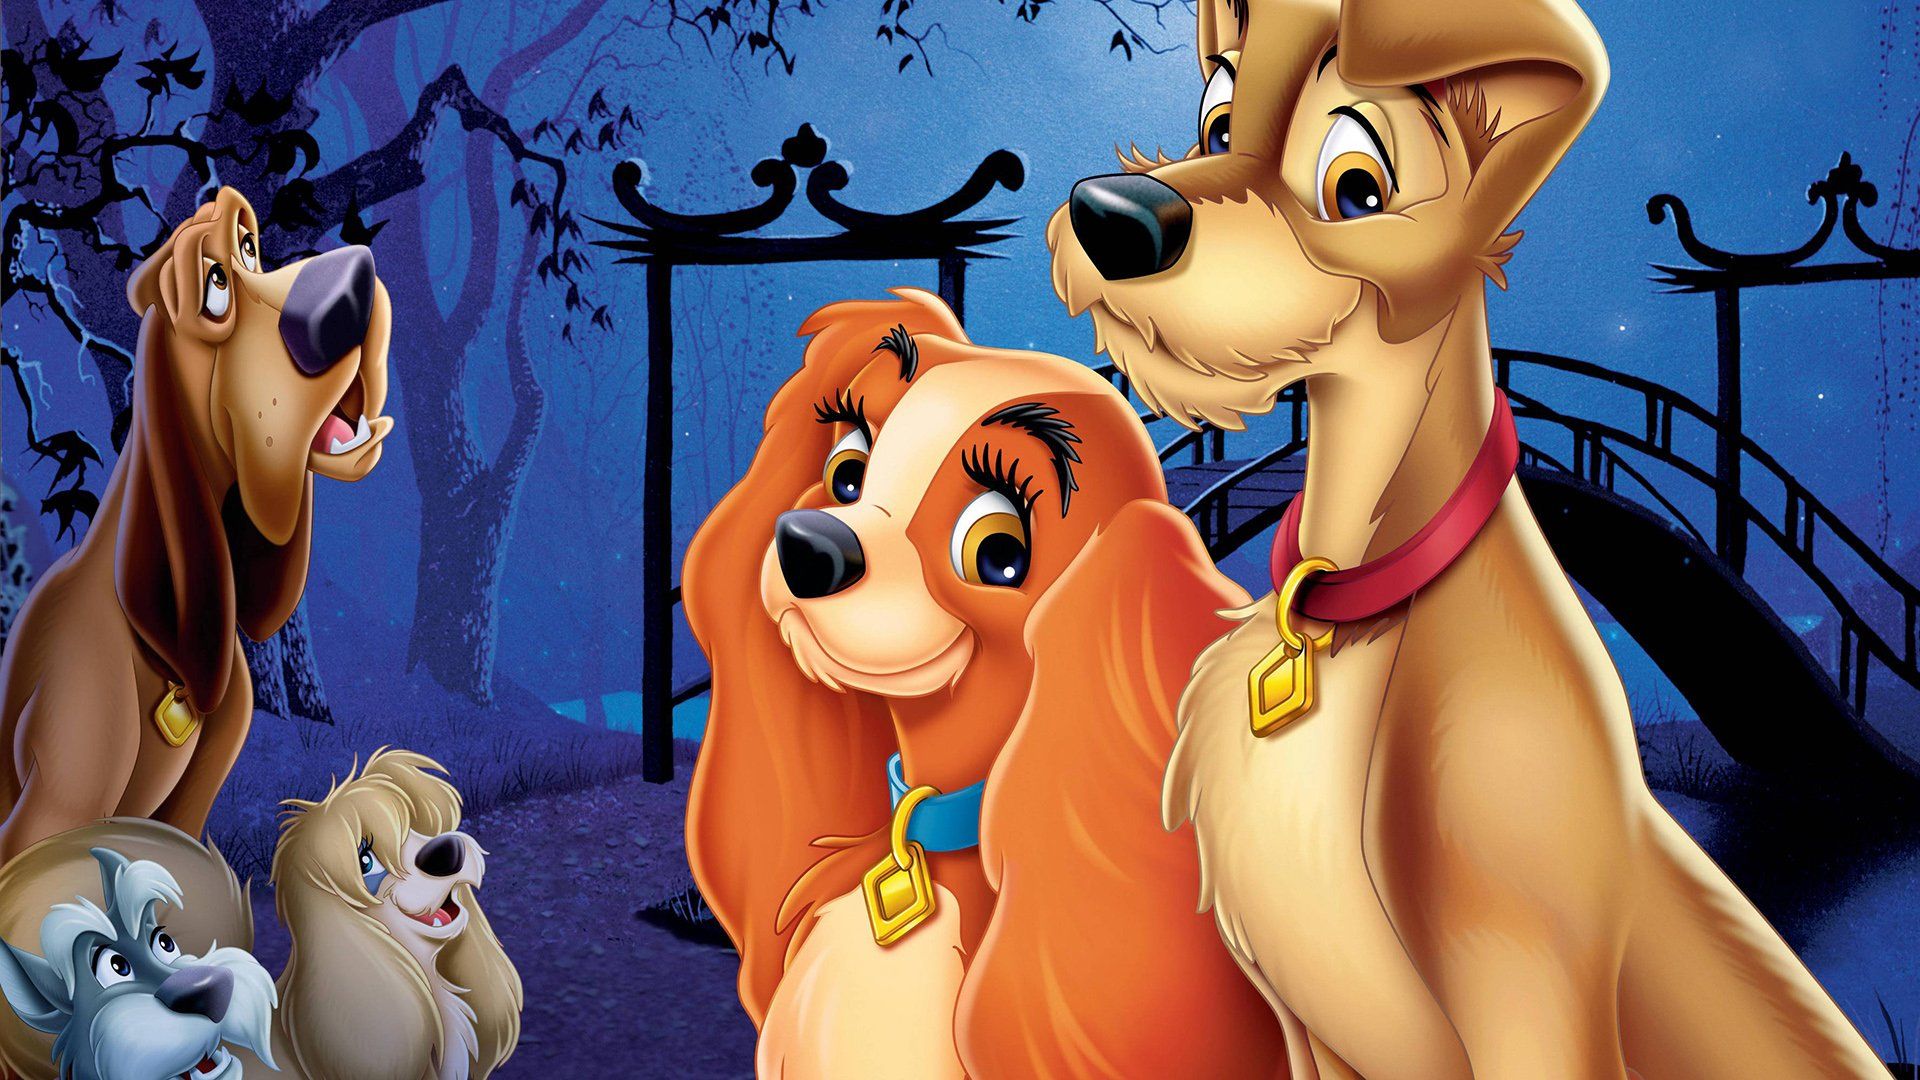 Lady and the Tramp (1955) HD Wallpaper. Background Image